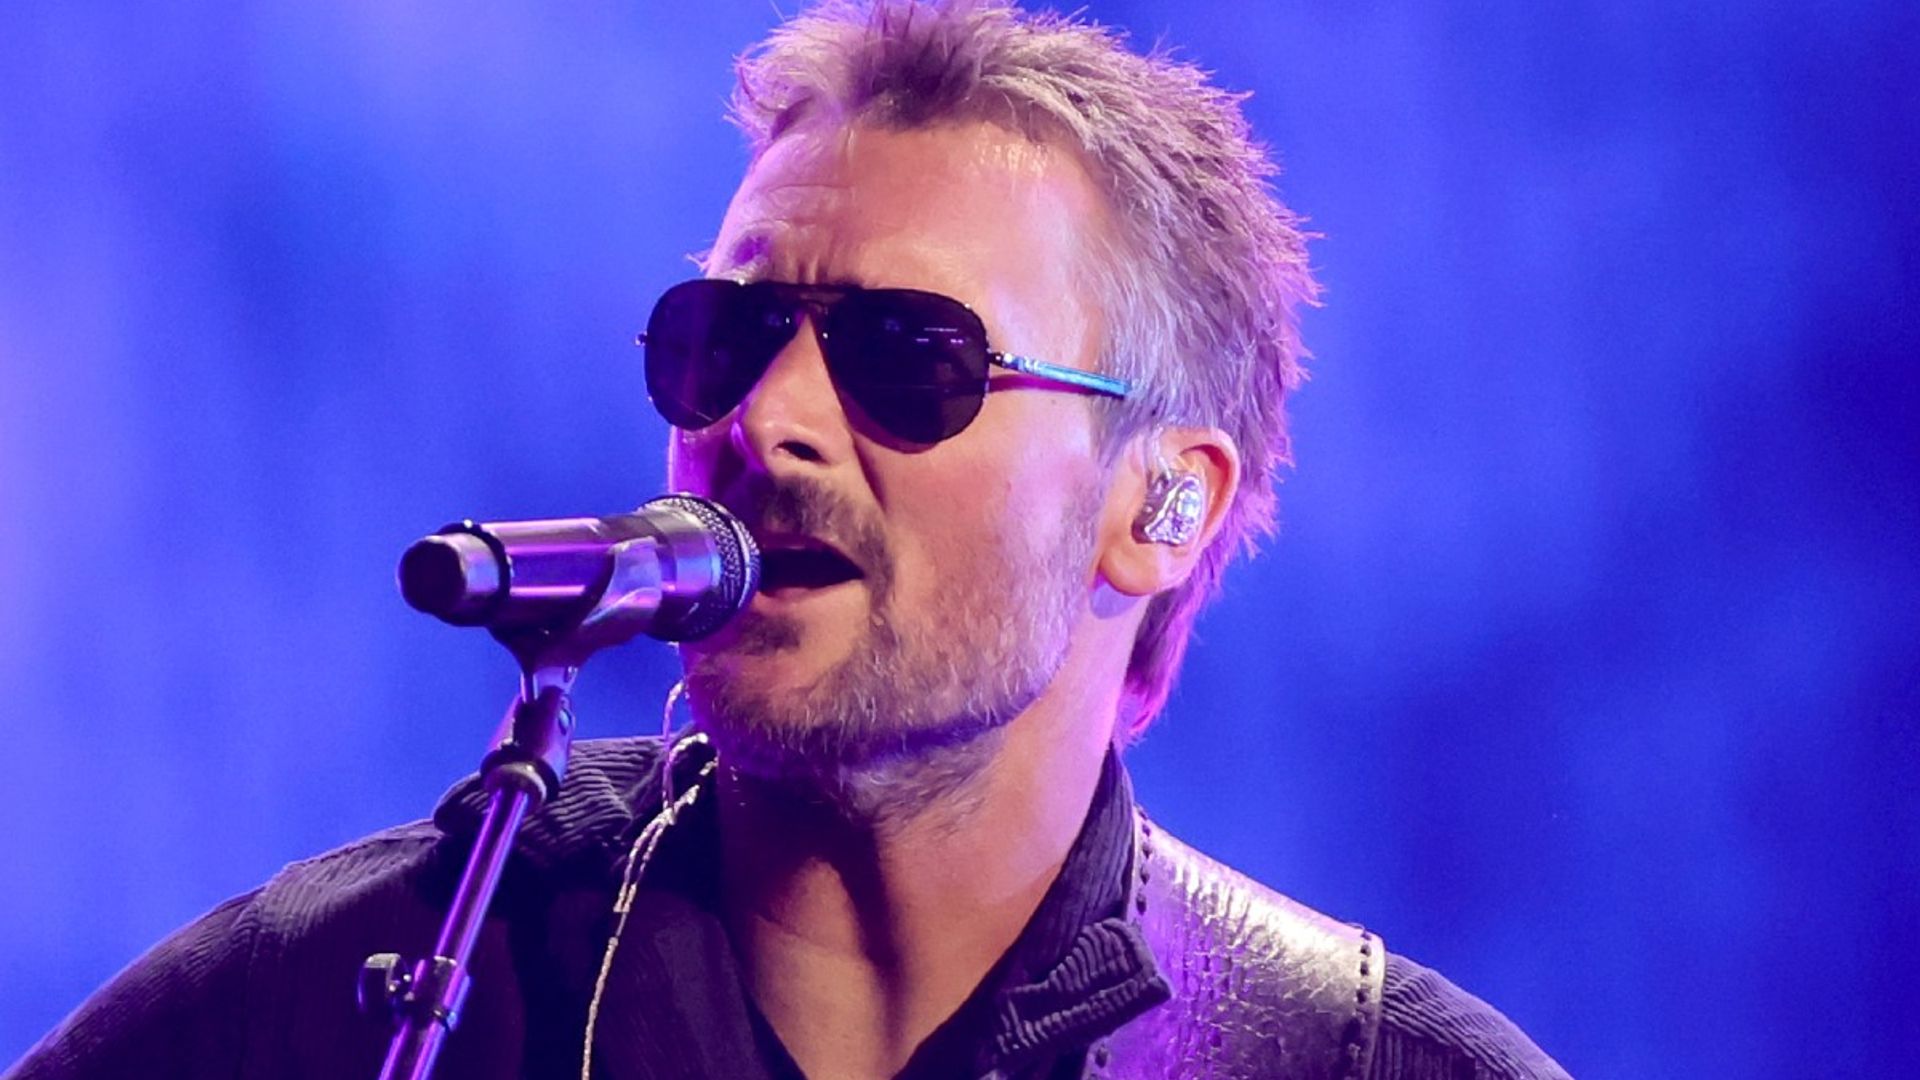 Eric Church reveals details of free concert for fans after canceling Texas show over NCAA game